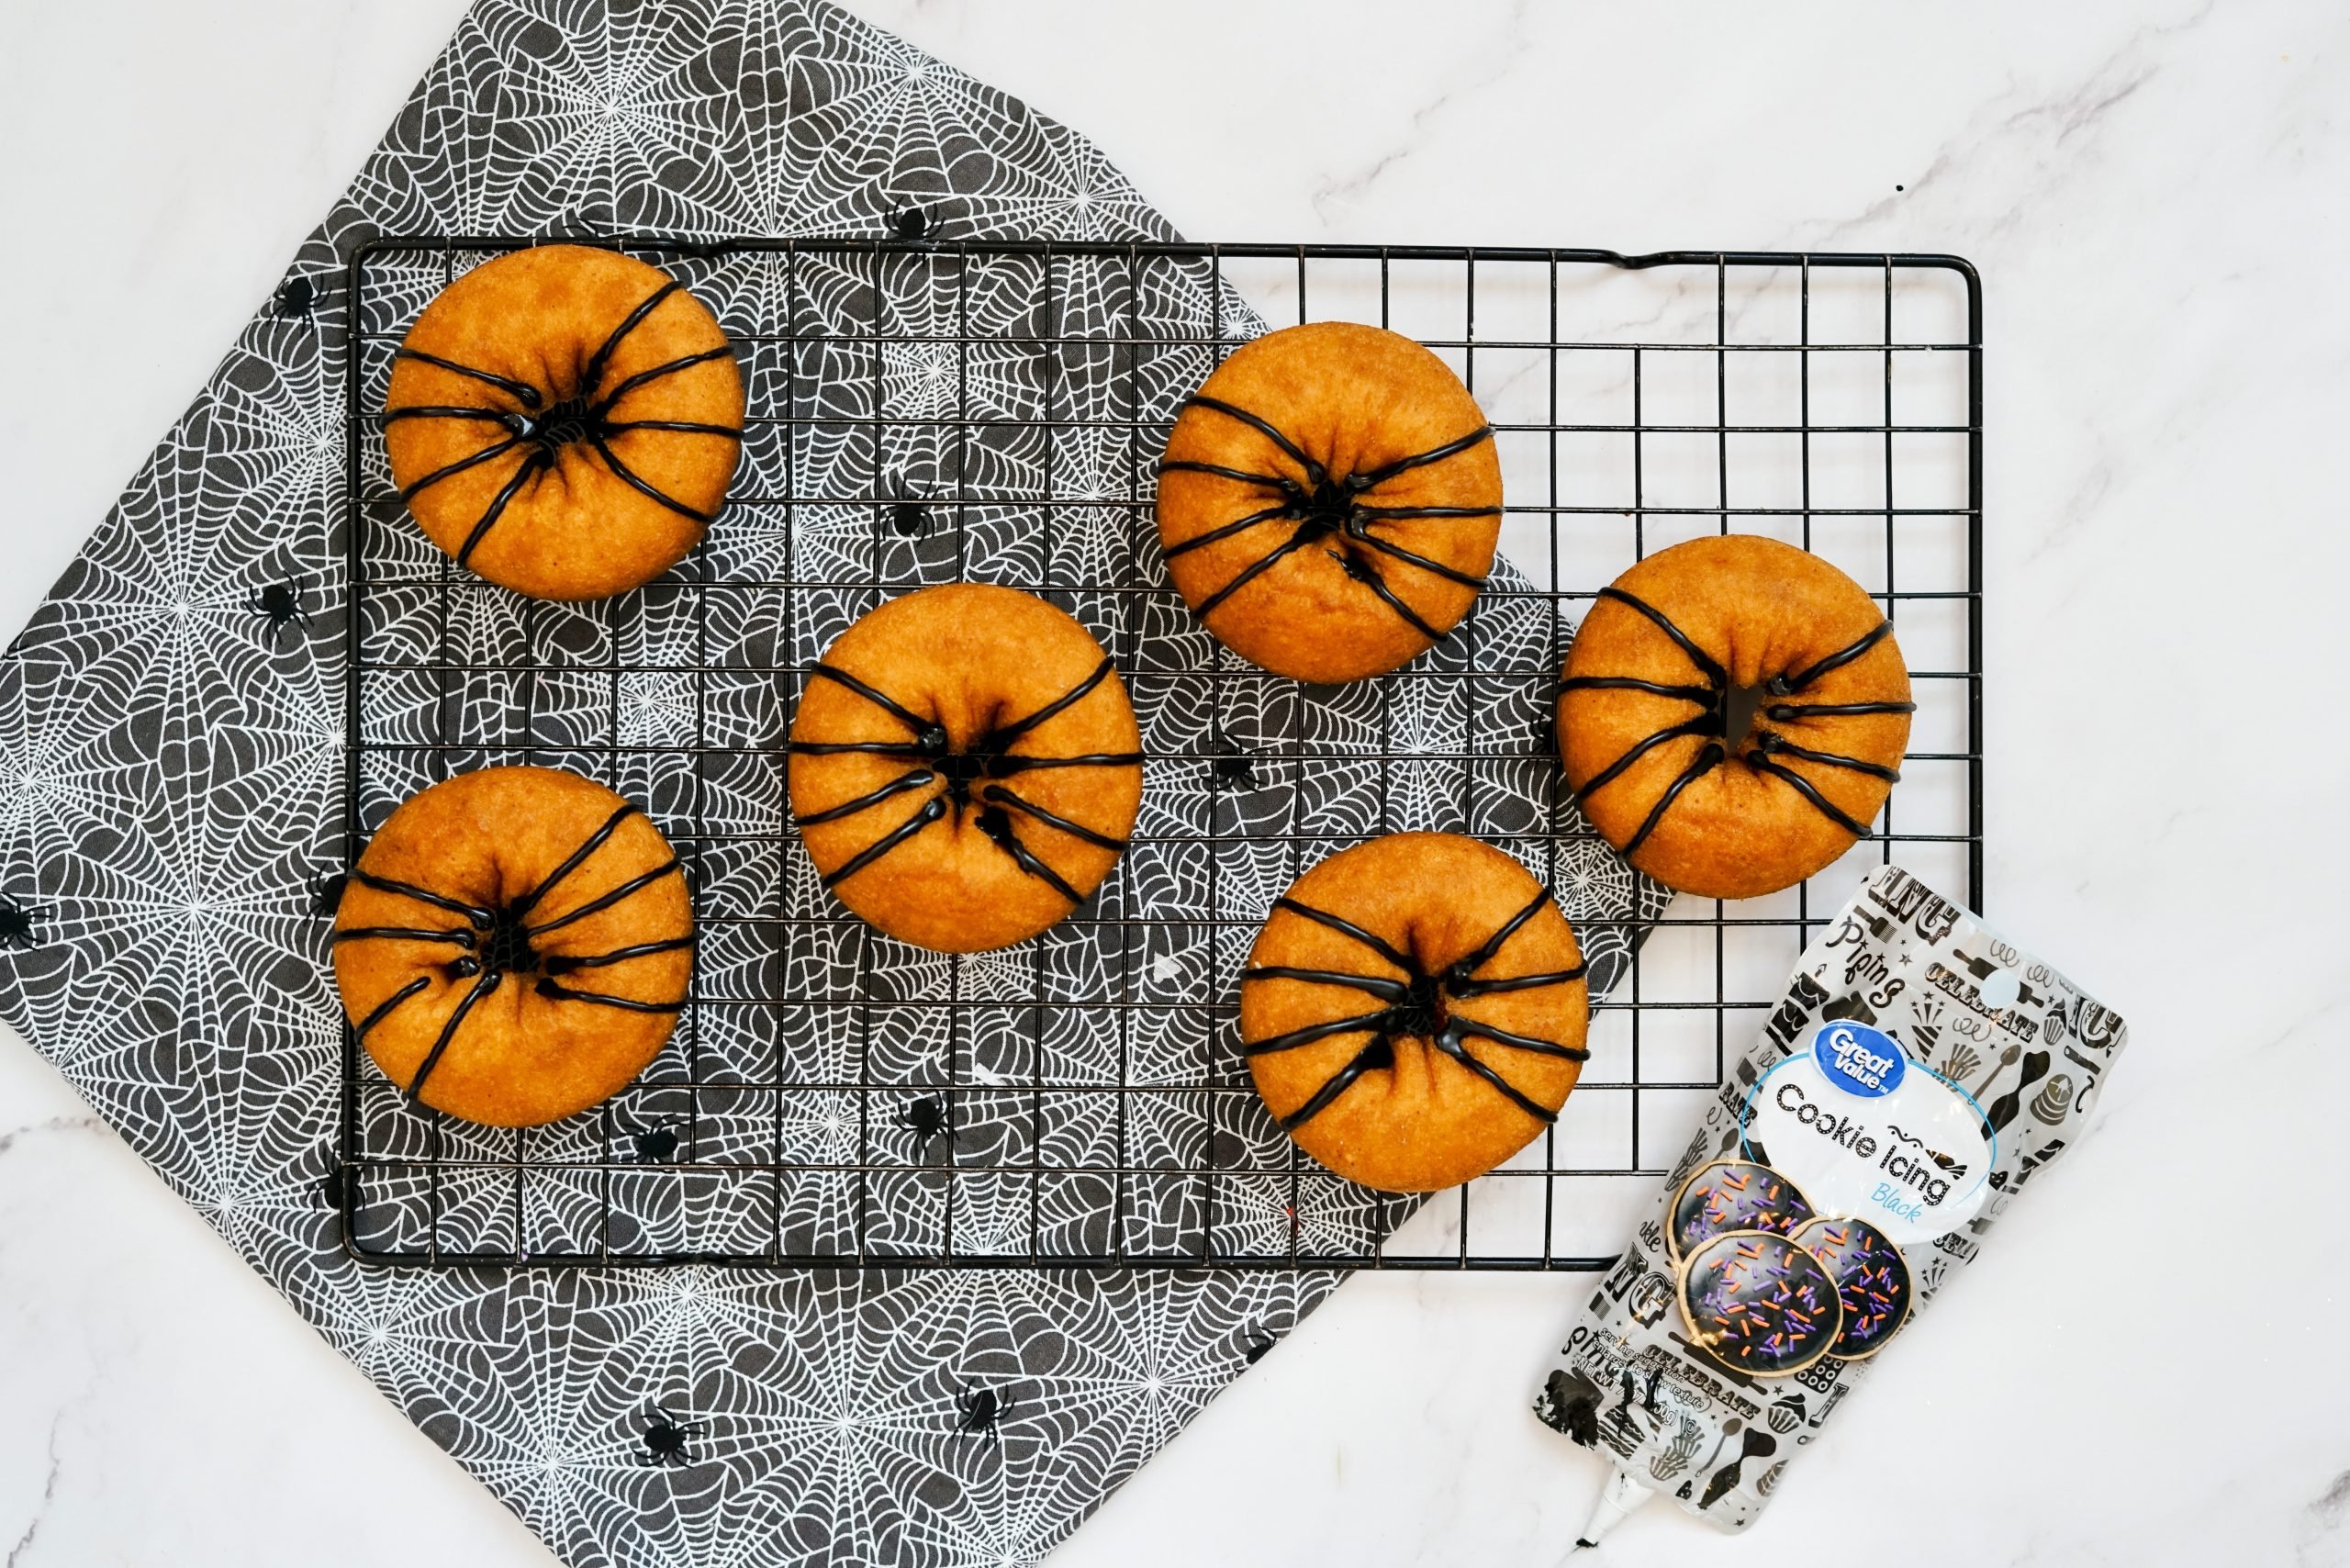 donut ingredients and scary halloween treats for kids